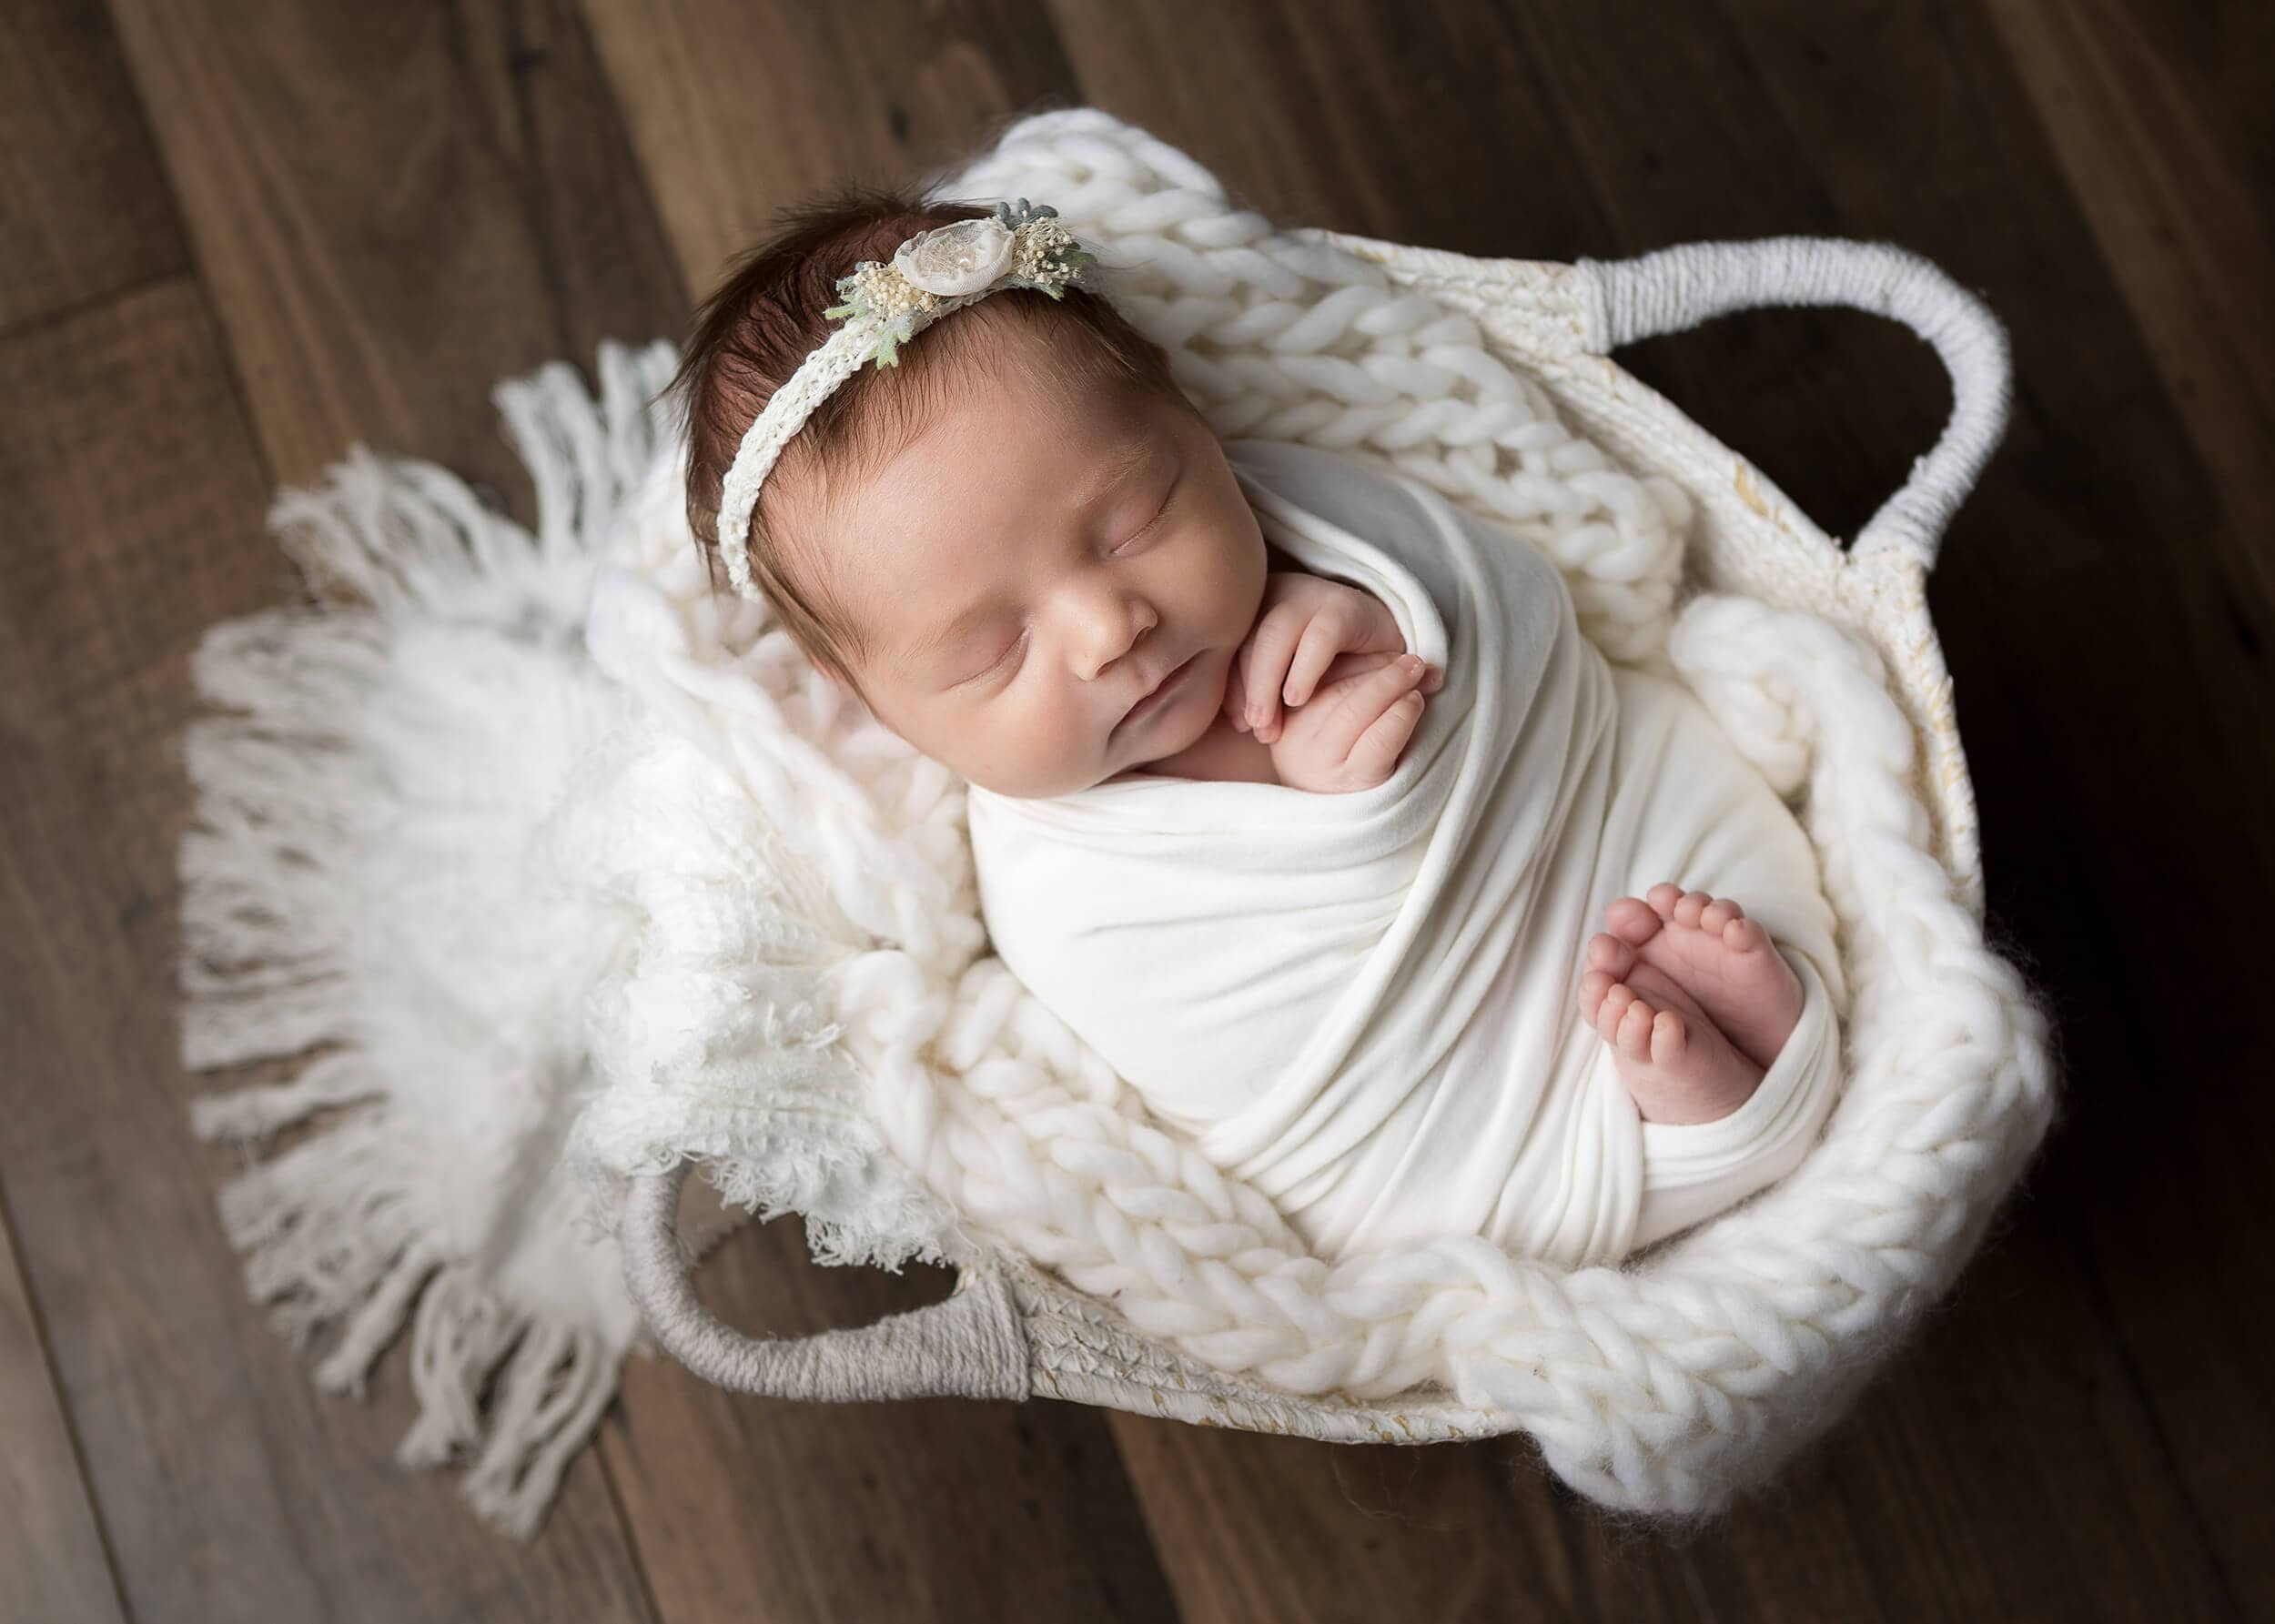 A newborn girl is wrapped in a white basket on a wooden floor.